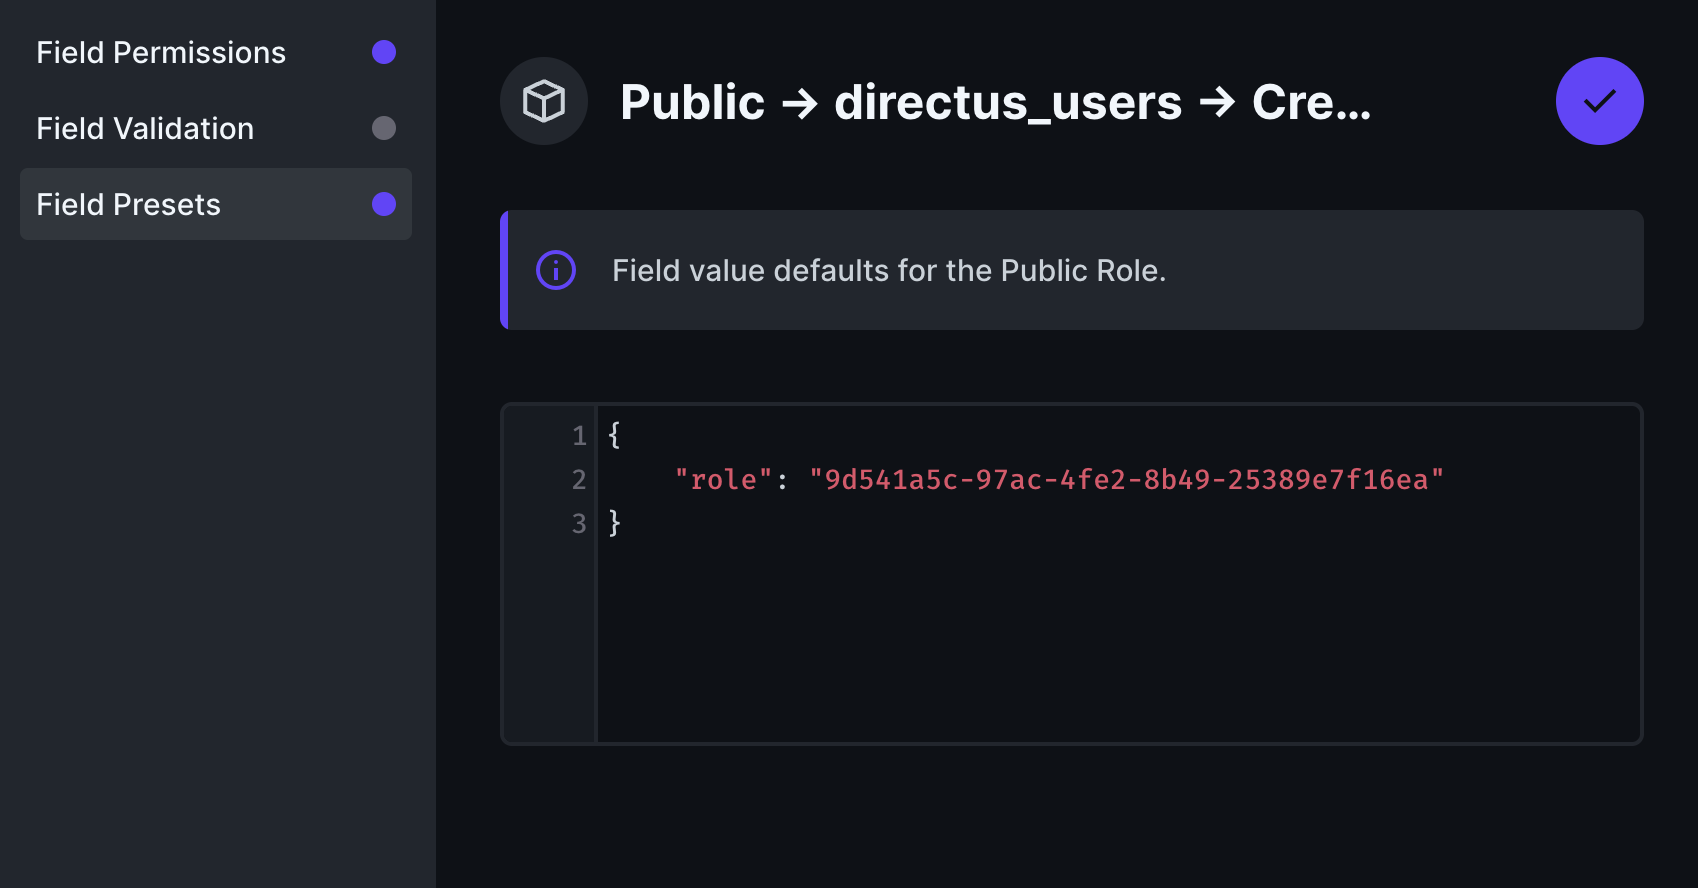 Public role directus_users create field presets set the role to the a unique ID